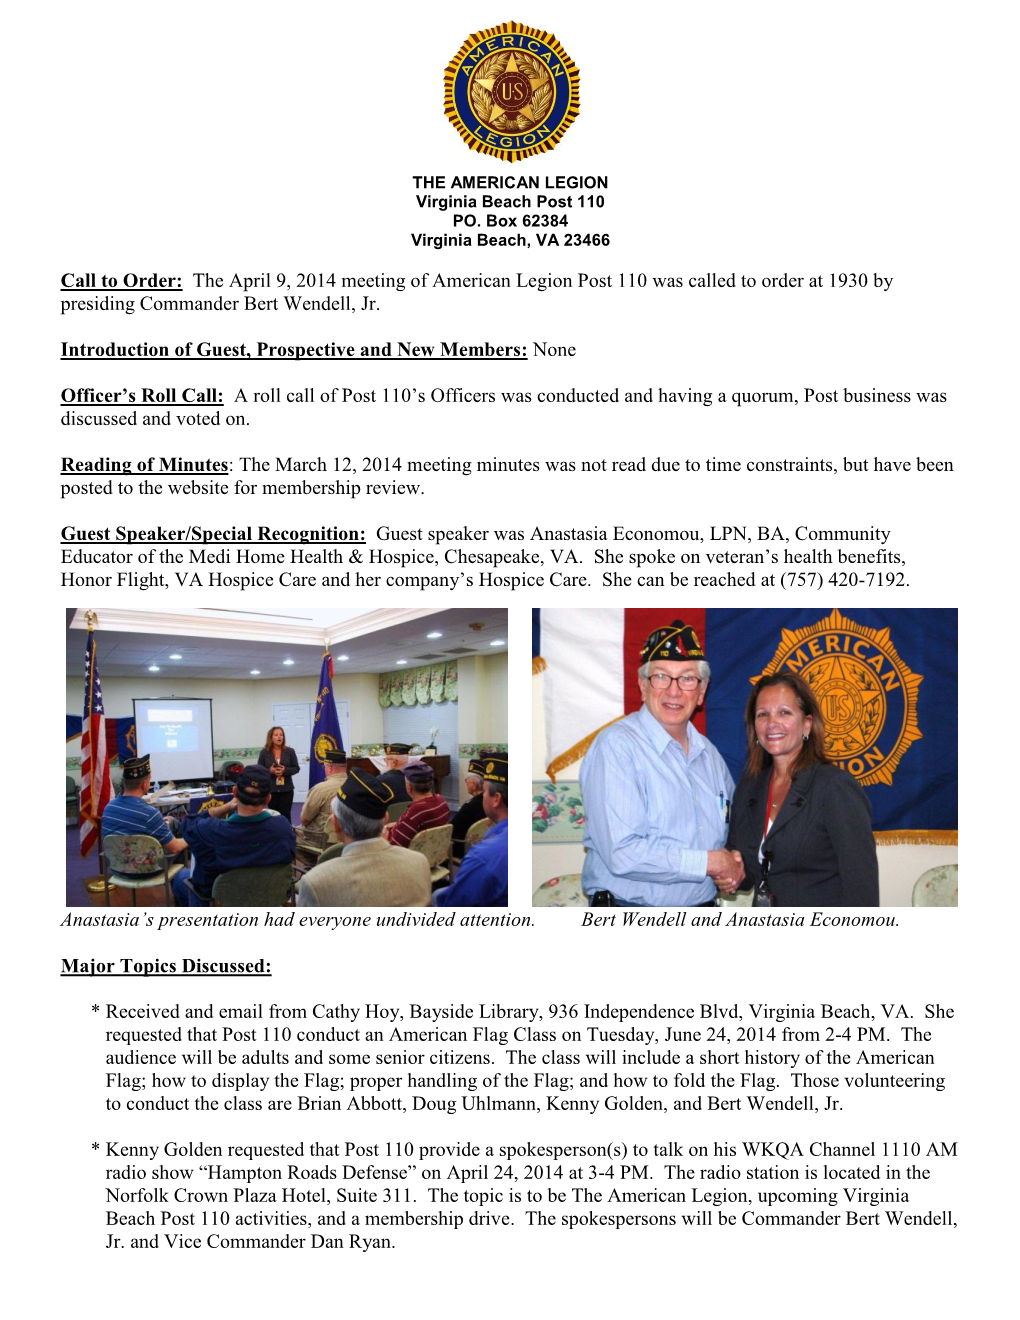 The April 9, 2014 Meeting of American Legion Post 110 Was Called to Order at 1930 by Presiding Commander Bert Wendell, Jr